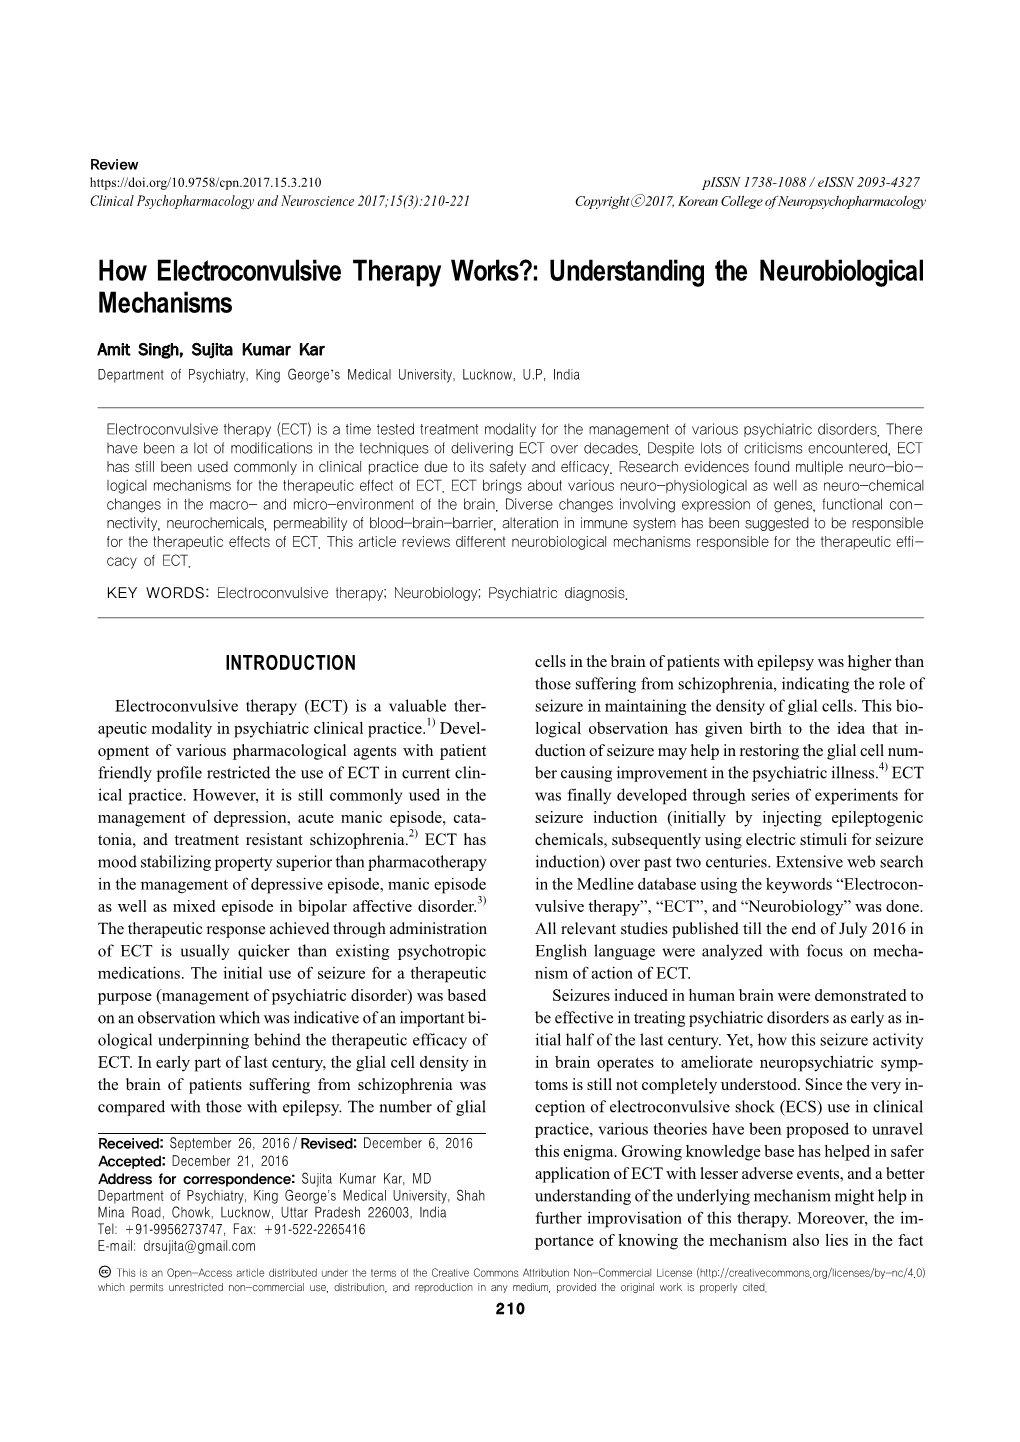 How Electroconvulsive Therapy Works?: Understanding the Neurobiological Mechanisms